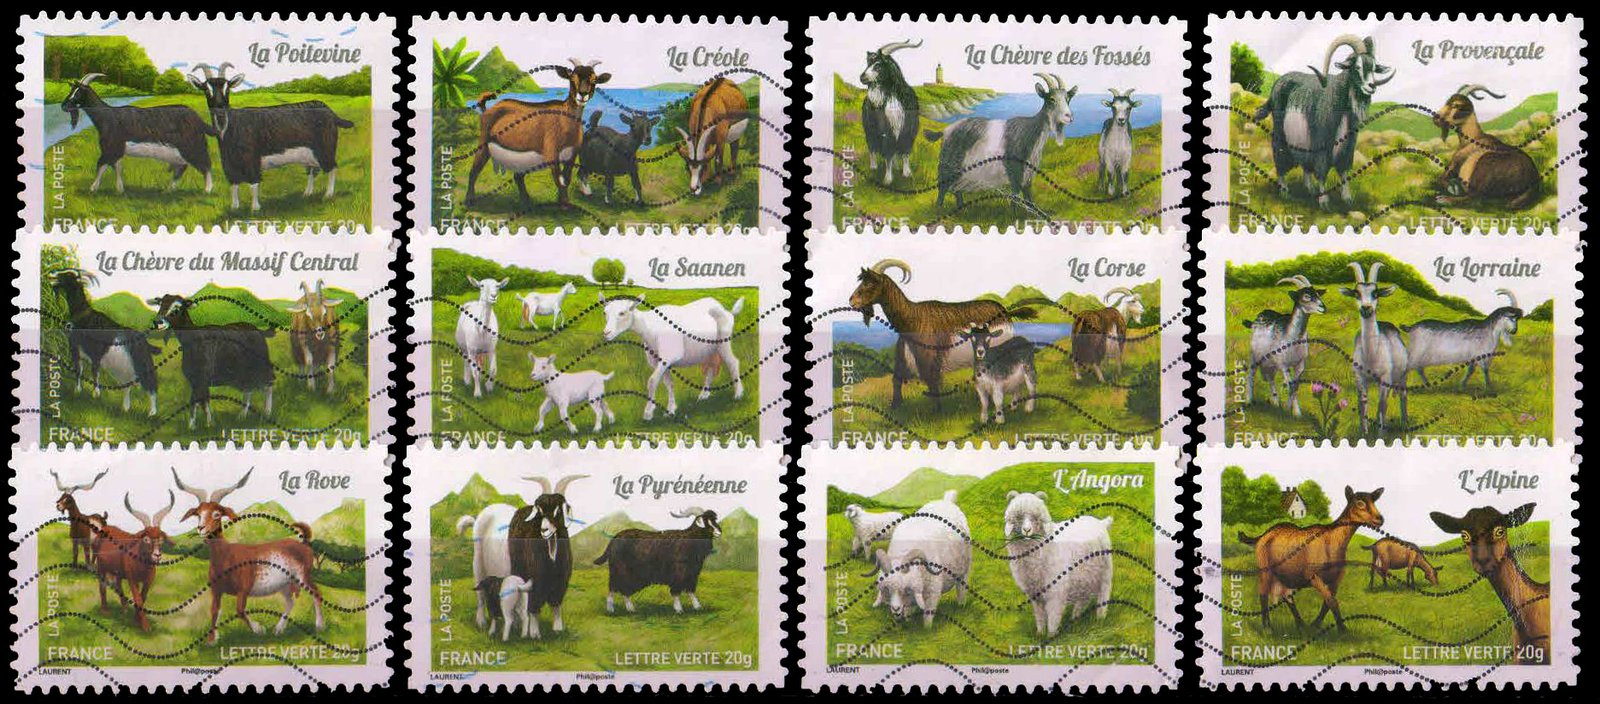 FRANCE 2015 - Regional Goats, Animal, Complete Set of 12, Used, S.G.  5726-5737, Cat £ 48